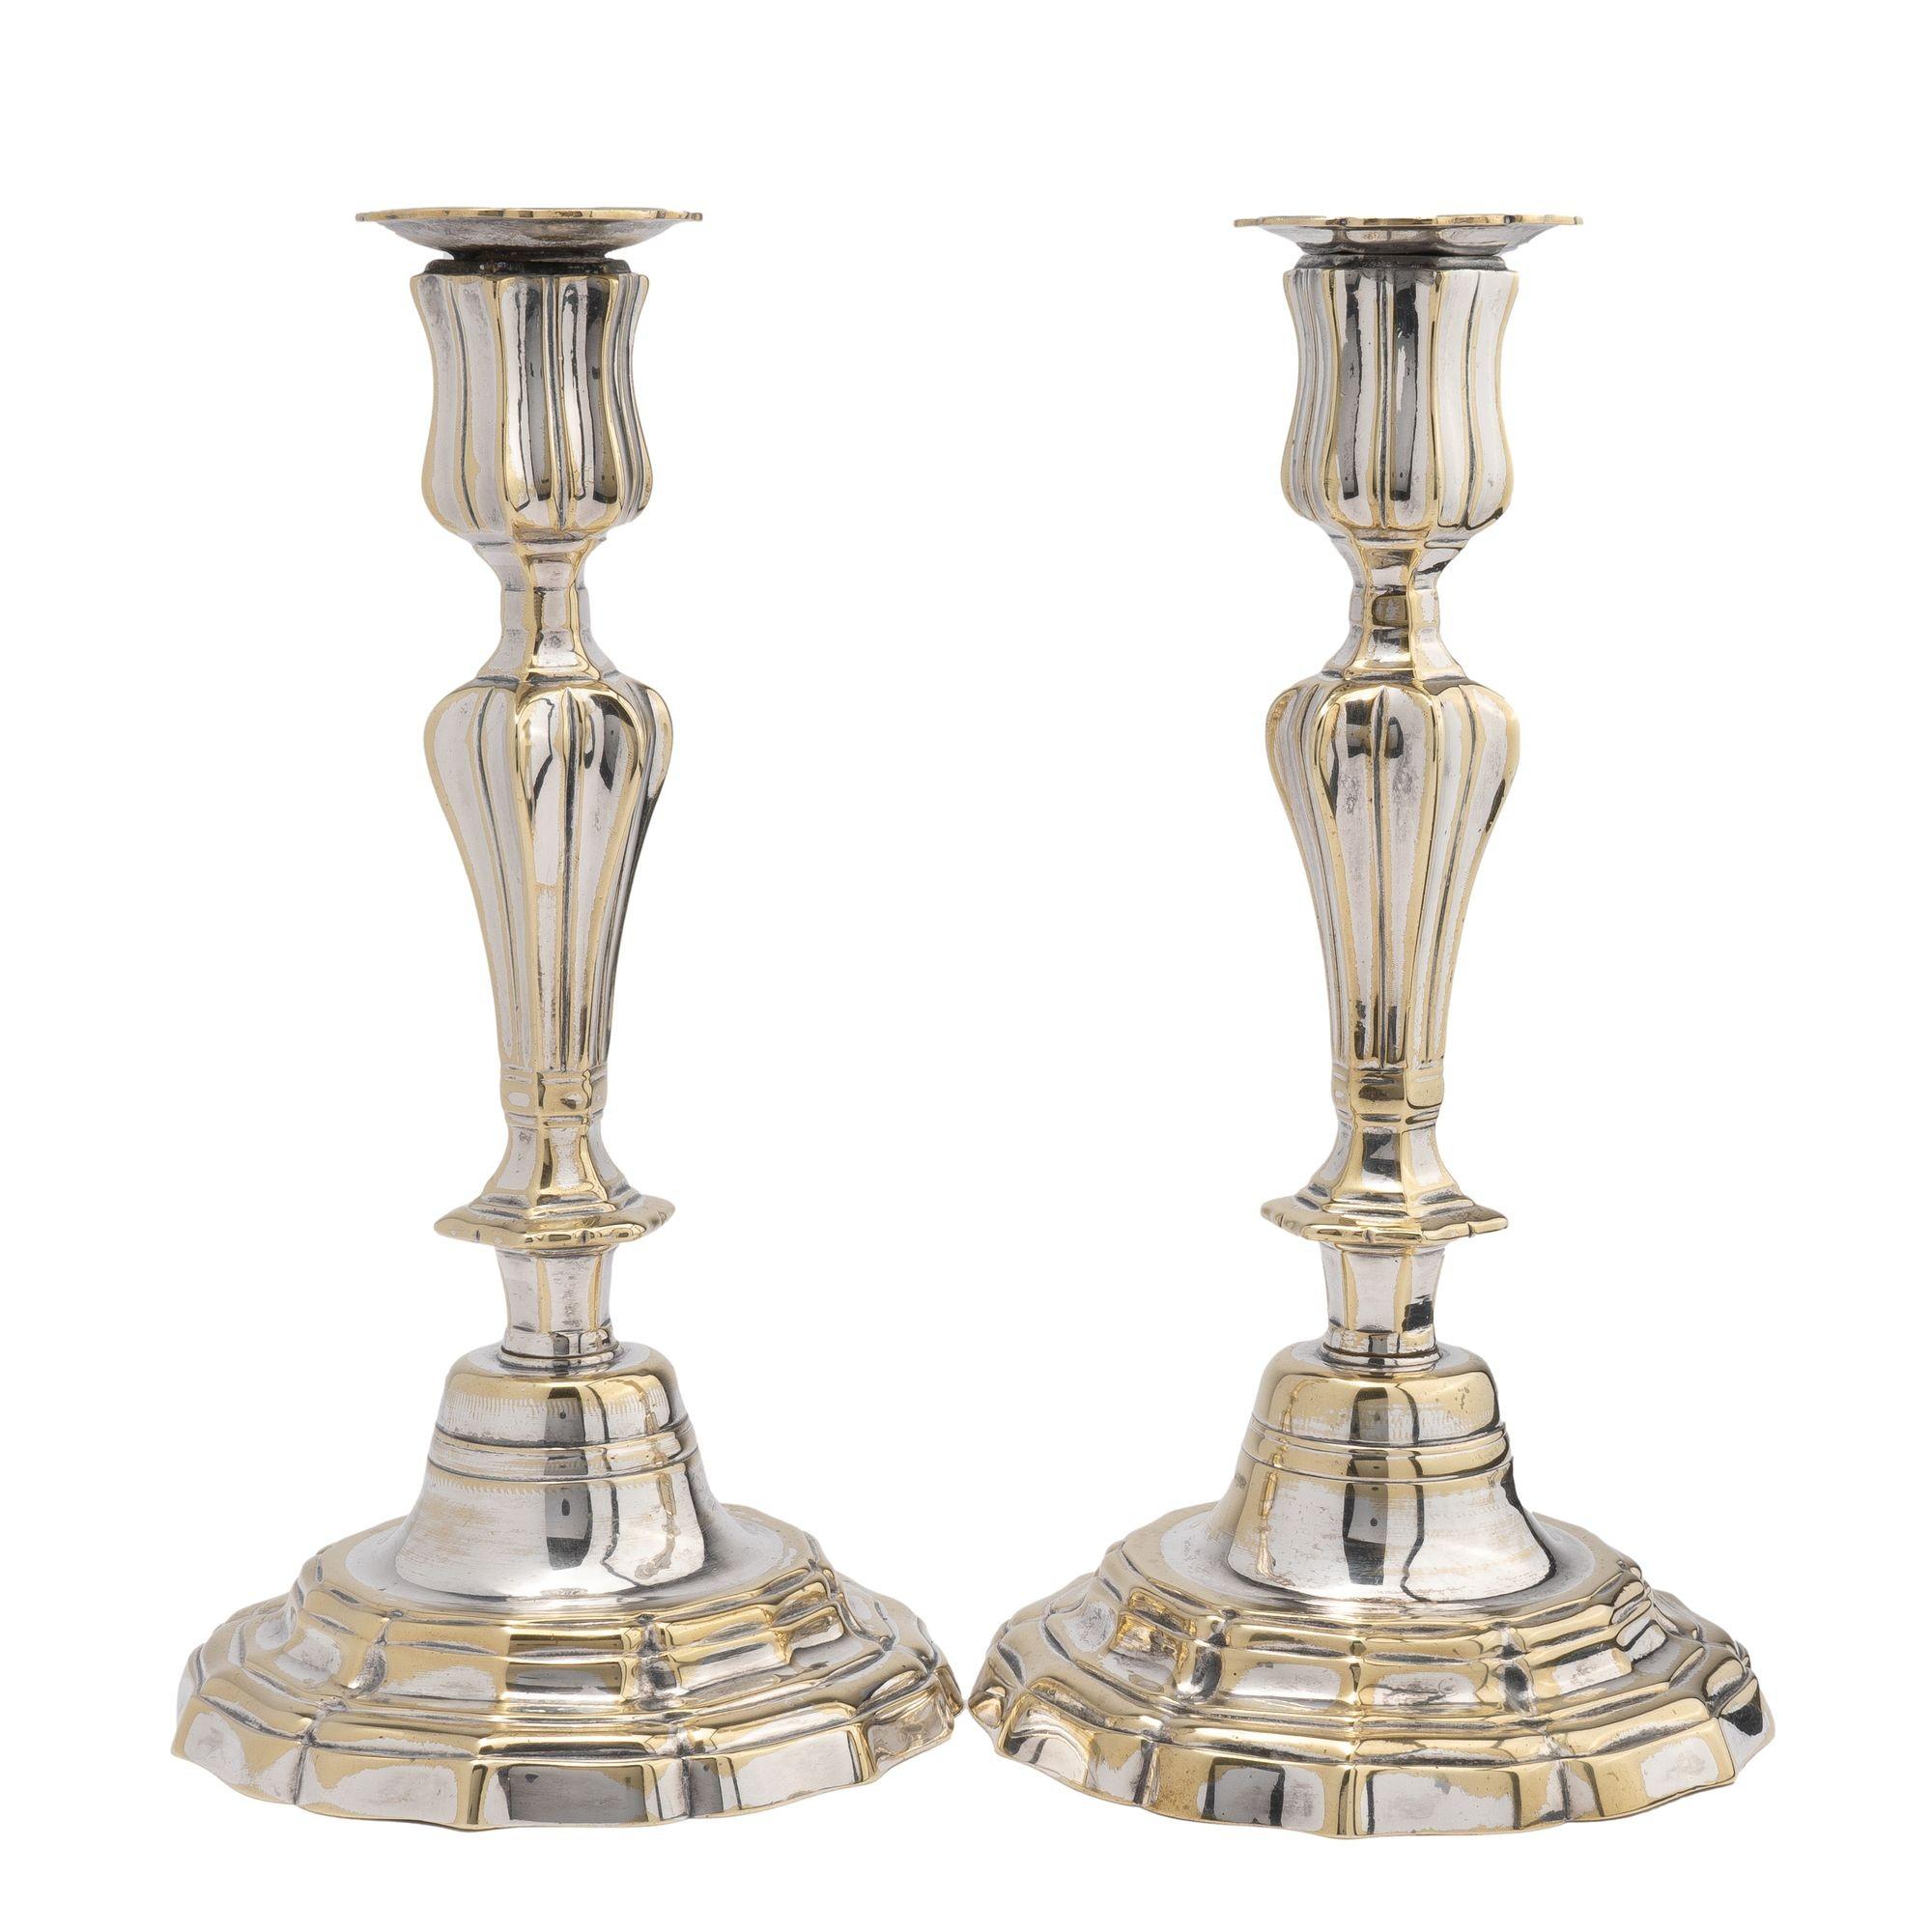 Pair of cast brass and silver plated candlesticks with fluted base and shaft. The candle cup is fitted with a bobeshe in a conforming profile. The stepped, scolloped base and candle shaft are joined by a threaded construction. The exuberance of the